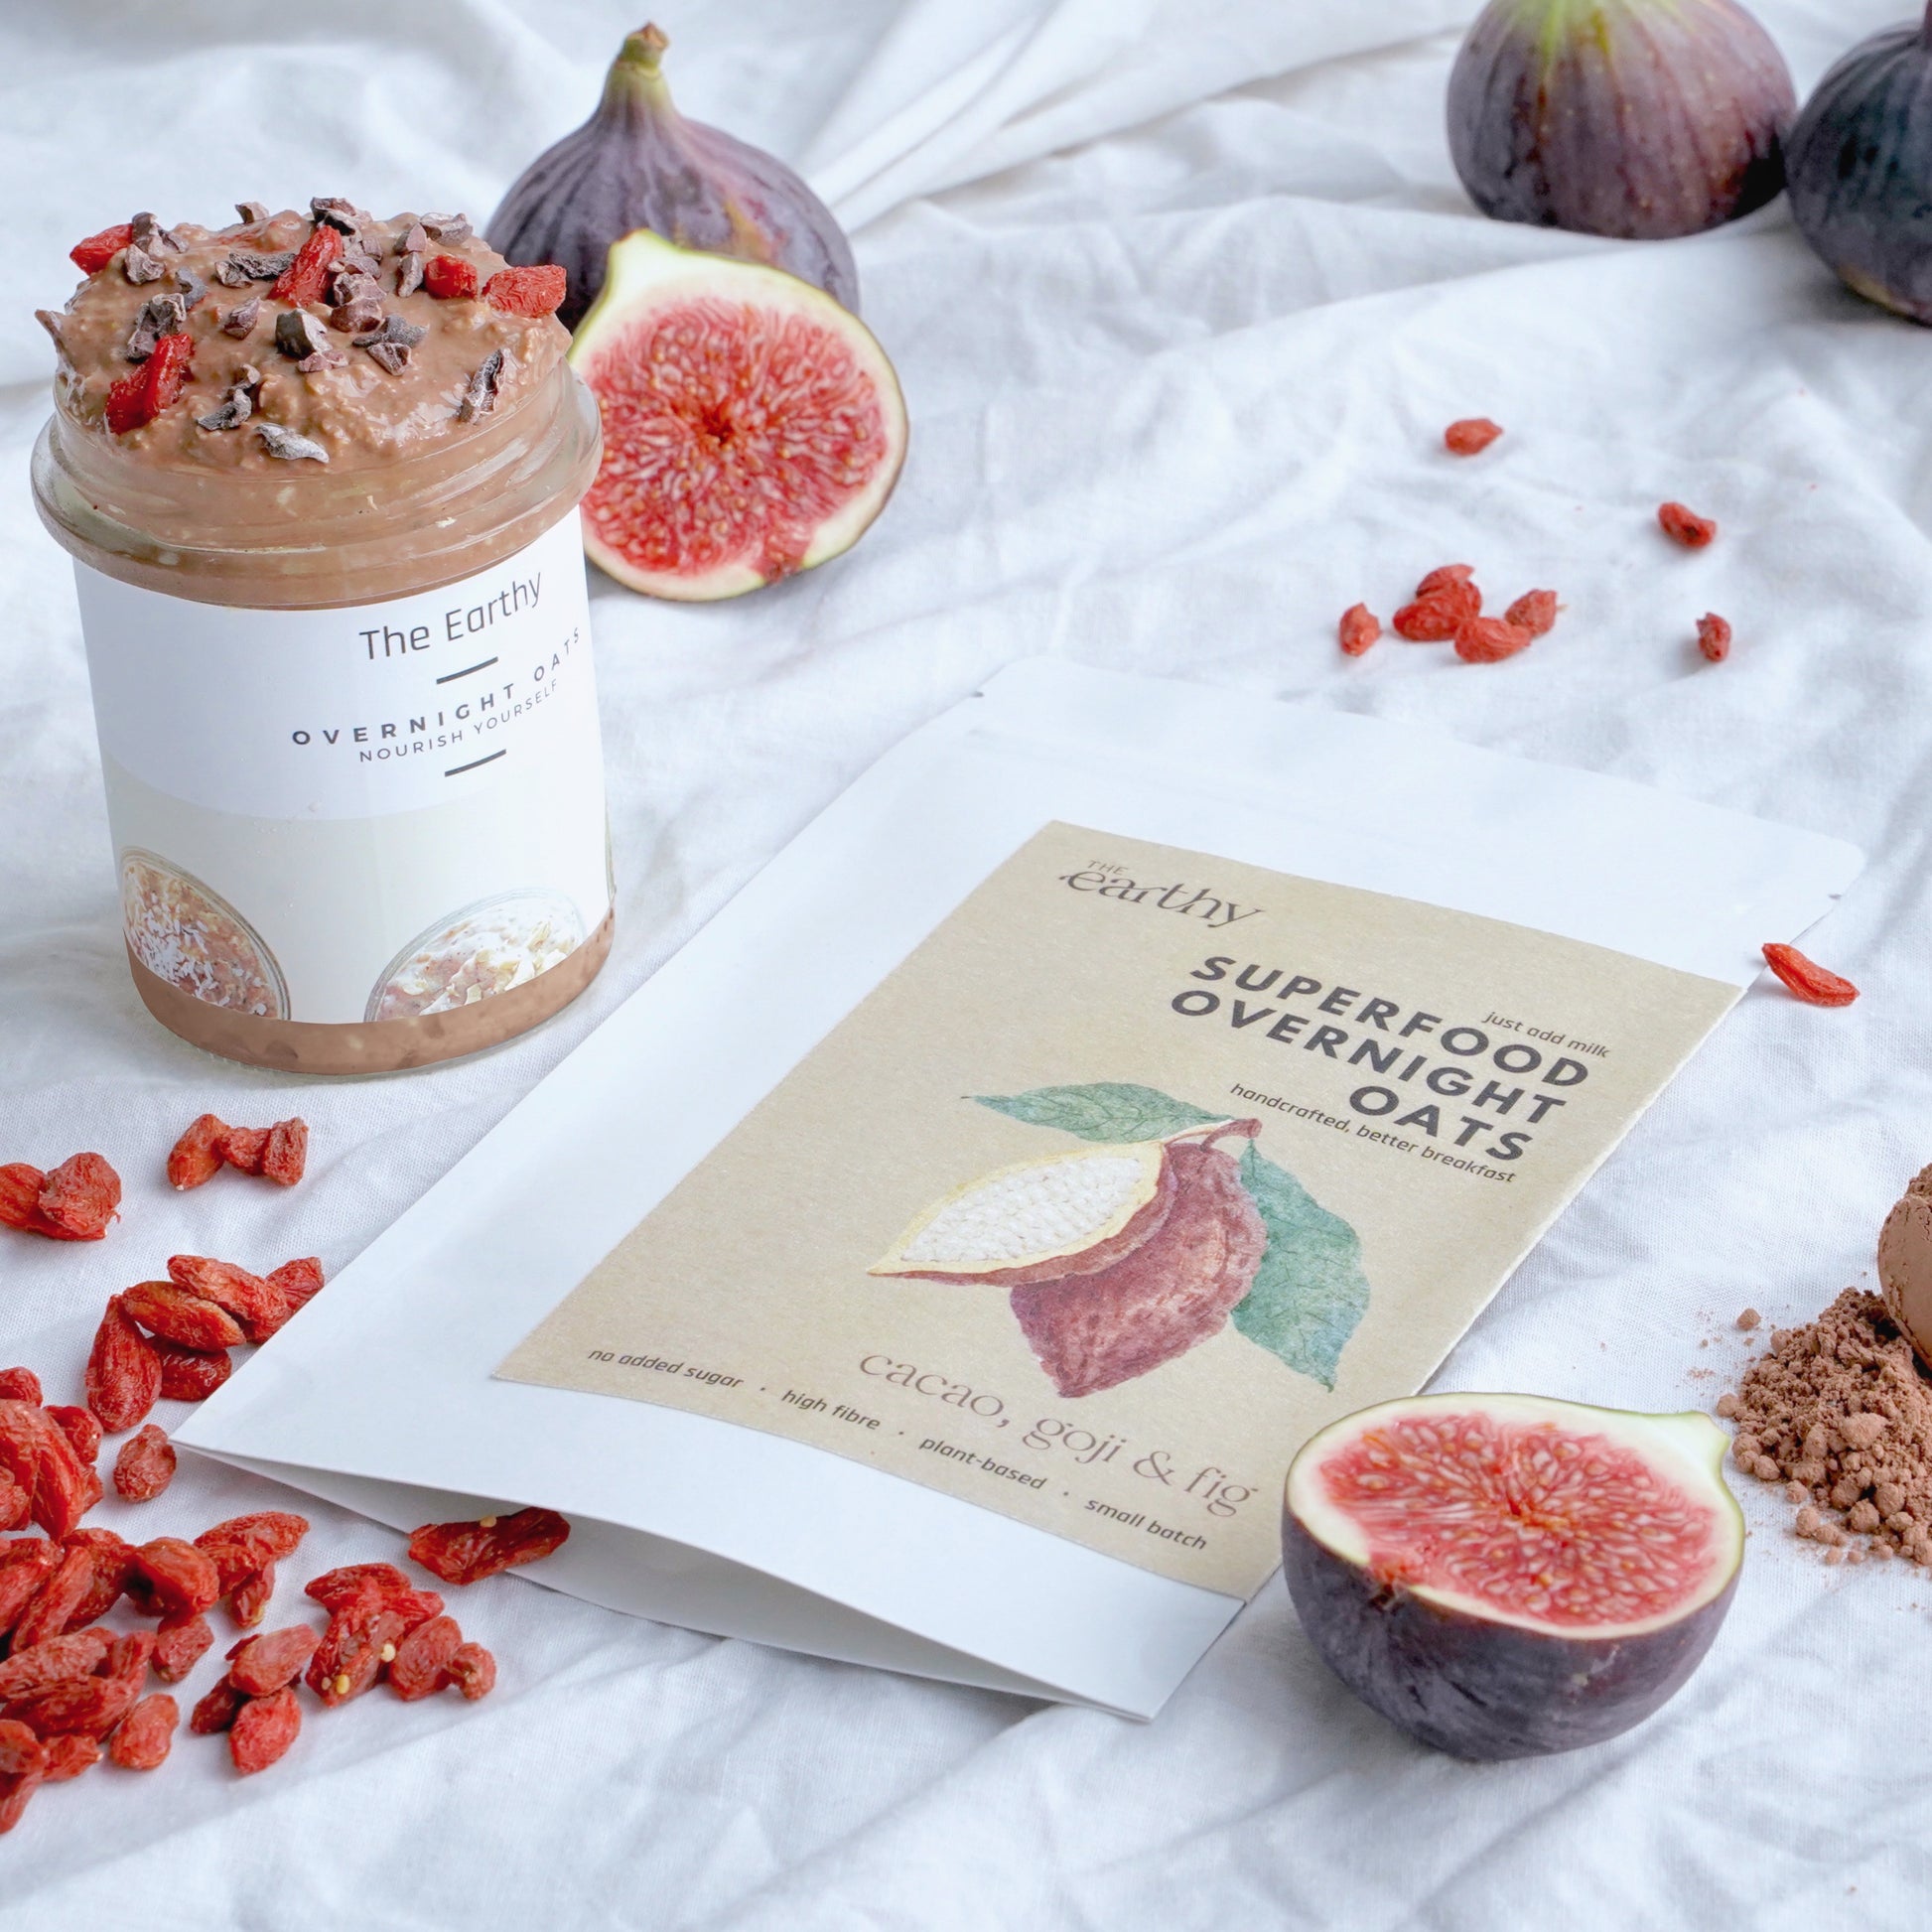 Chocolate, Fig & Goji Dry Mix for Overnight Oats - dark chocolate chunks, chewy fig pieces, and vibrant goji berries in resealable pouch